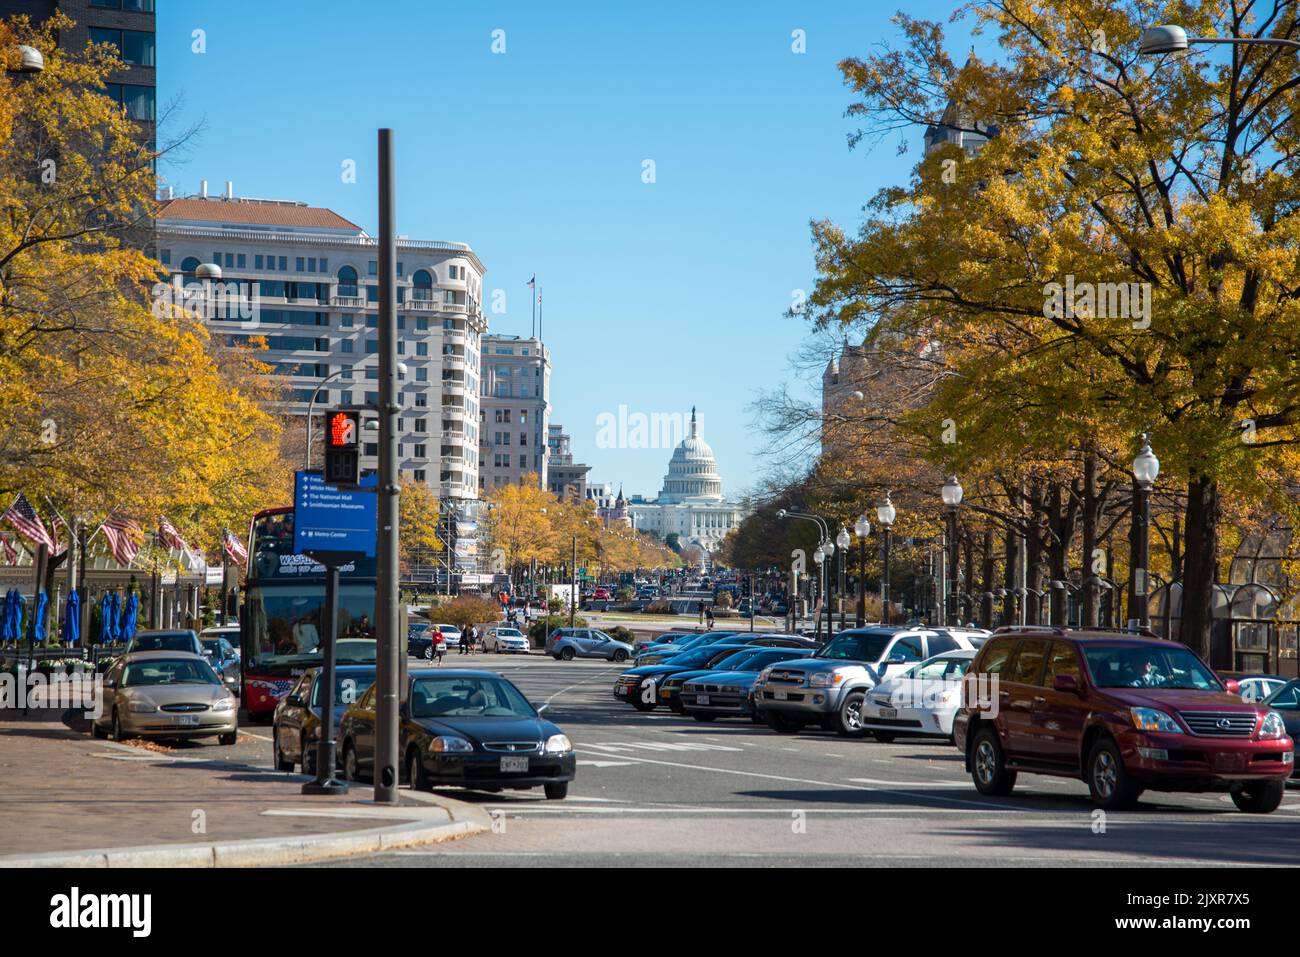 The US Capitol in the far off distance, Washington DC. Stock Photo